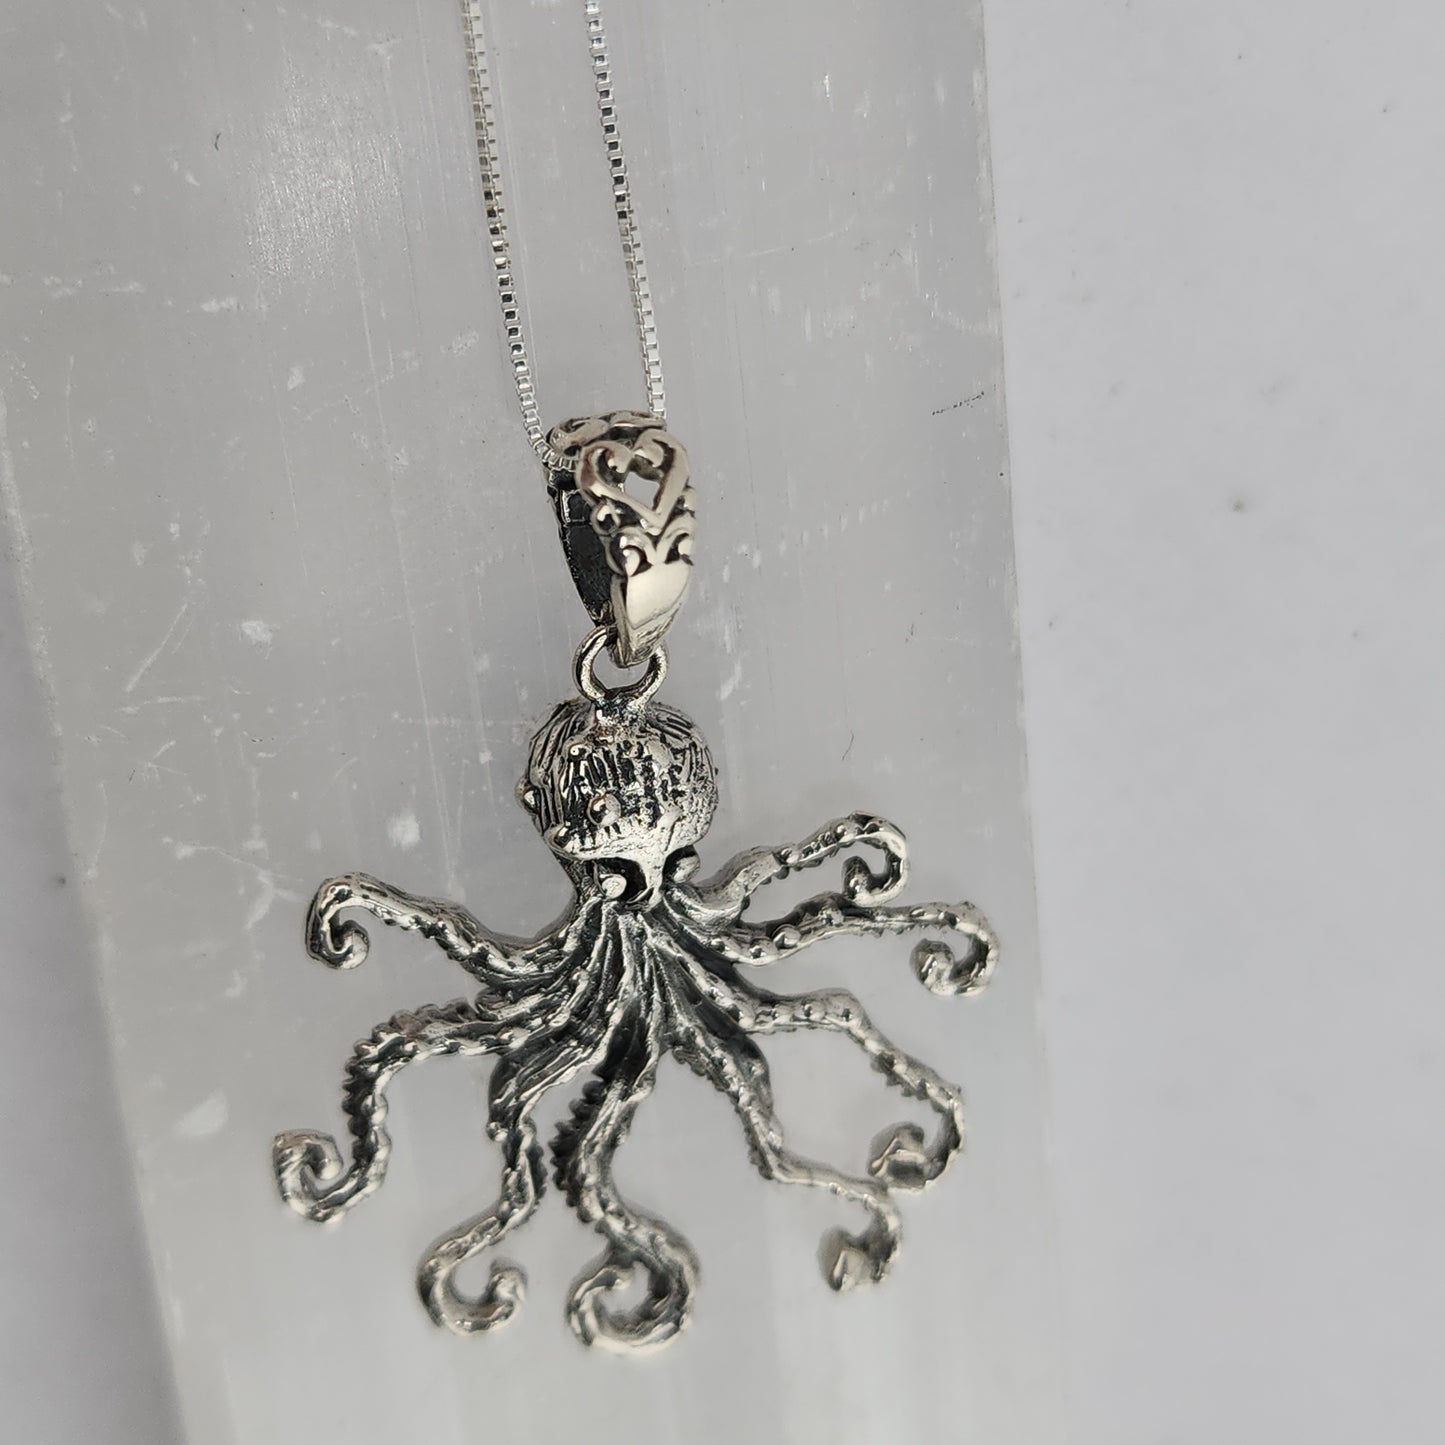 S.S. Octopus Necklaces